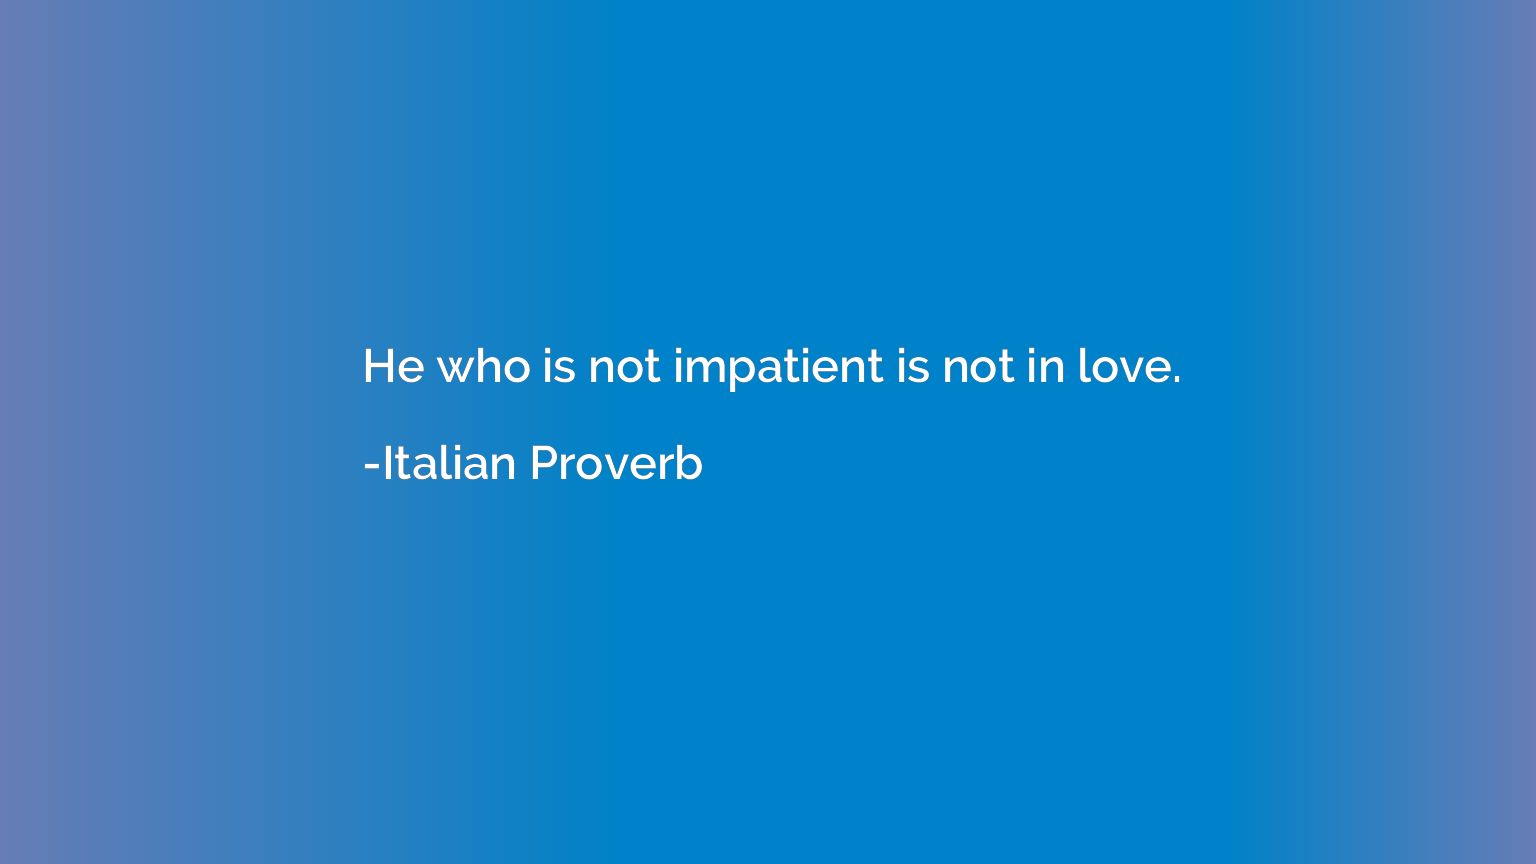 He who is not impatient is not in love.